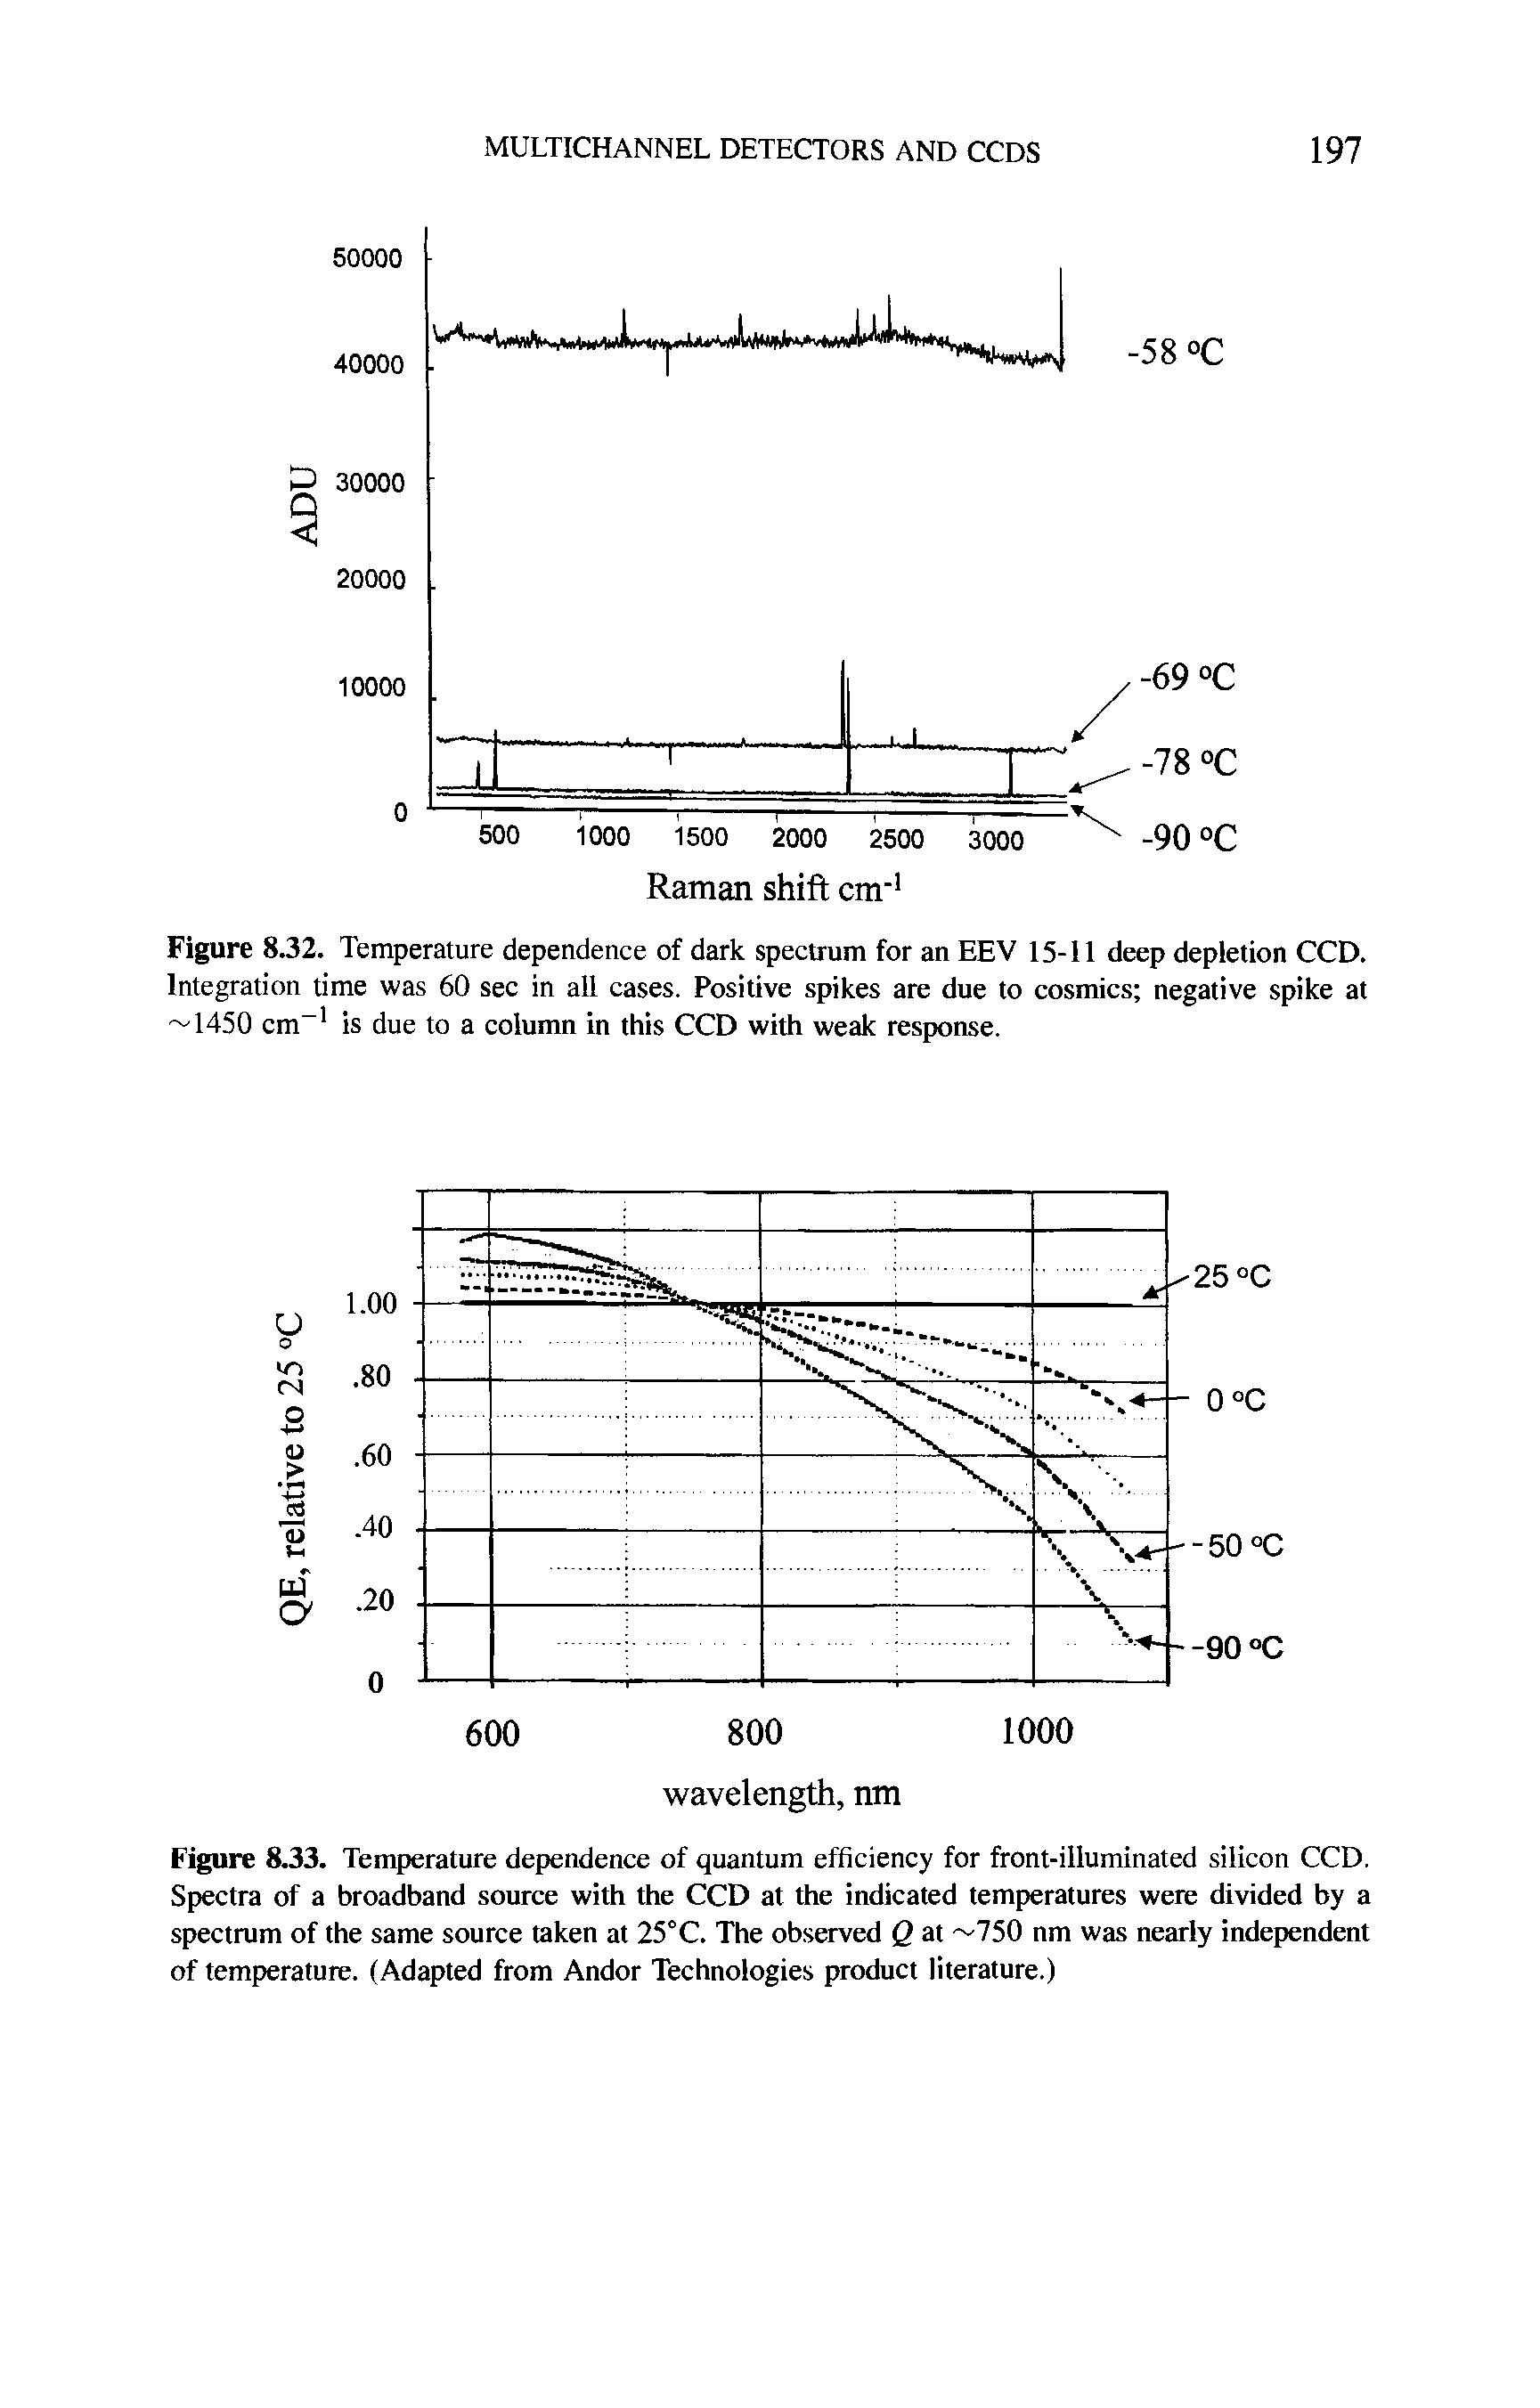 Figure 8.33. Temperature dependence of quantum efficiency for front-illuminated silicon CCD. Spectra of a broadband source with the CCD at the indicated temperatures were divided by a spectrum of the same source taken at 25°C. The observed Q at 750 nm was nearly independent of temperature. (Adapted from Andor Technologies product literature.)...